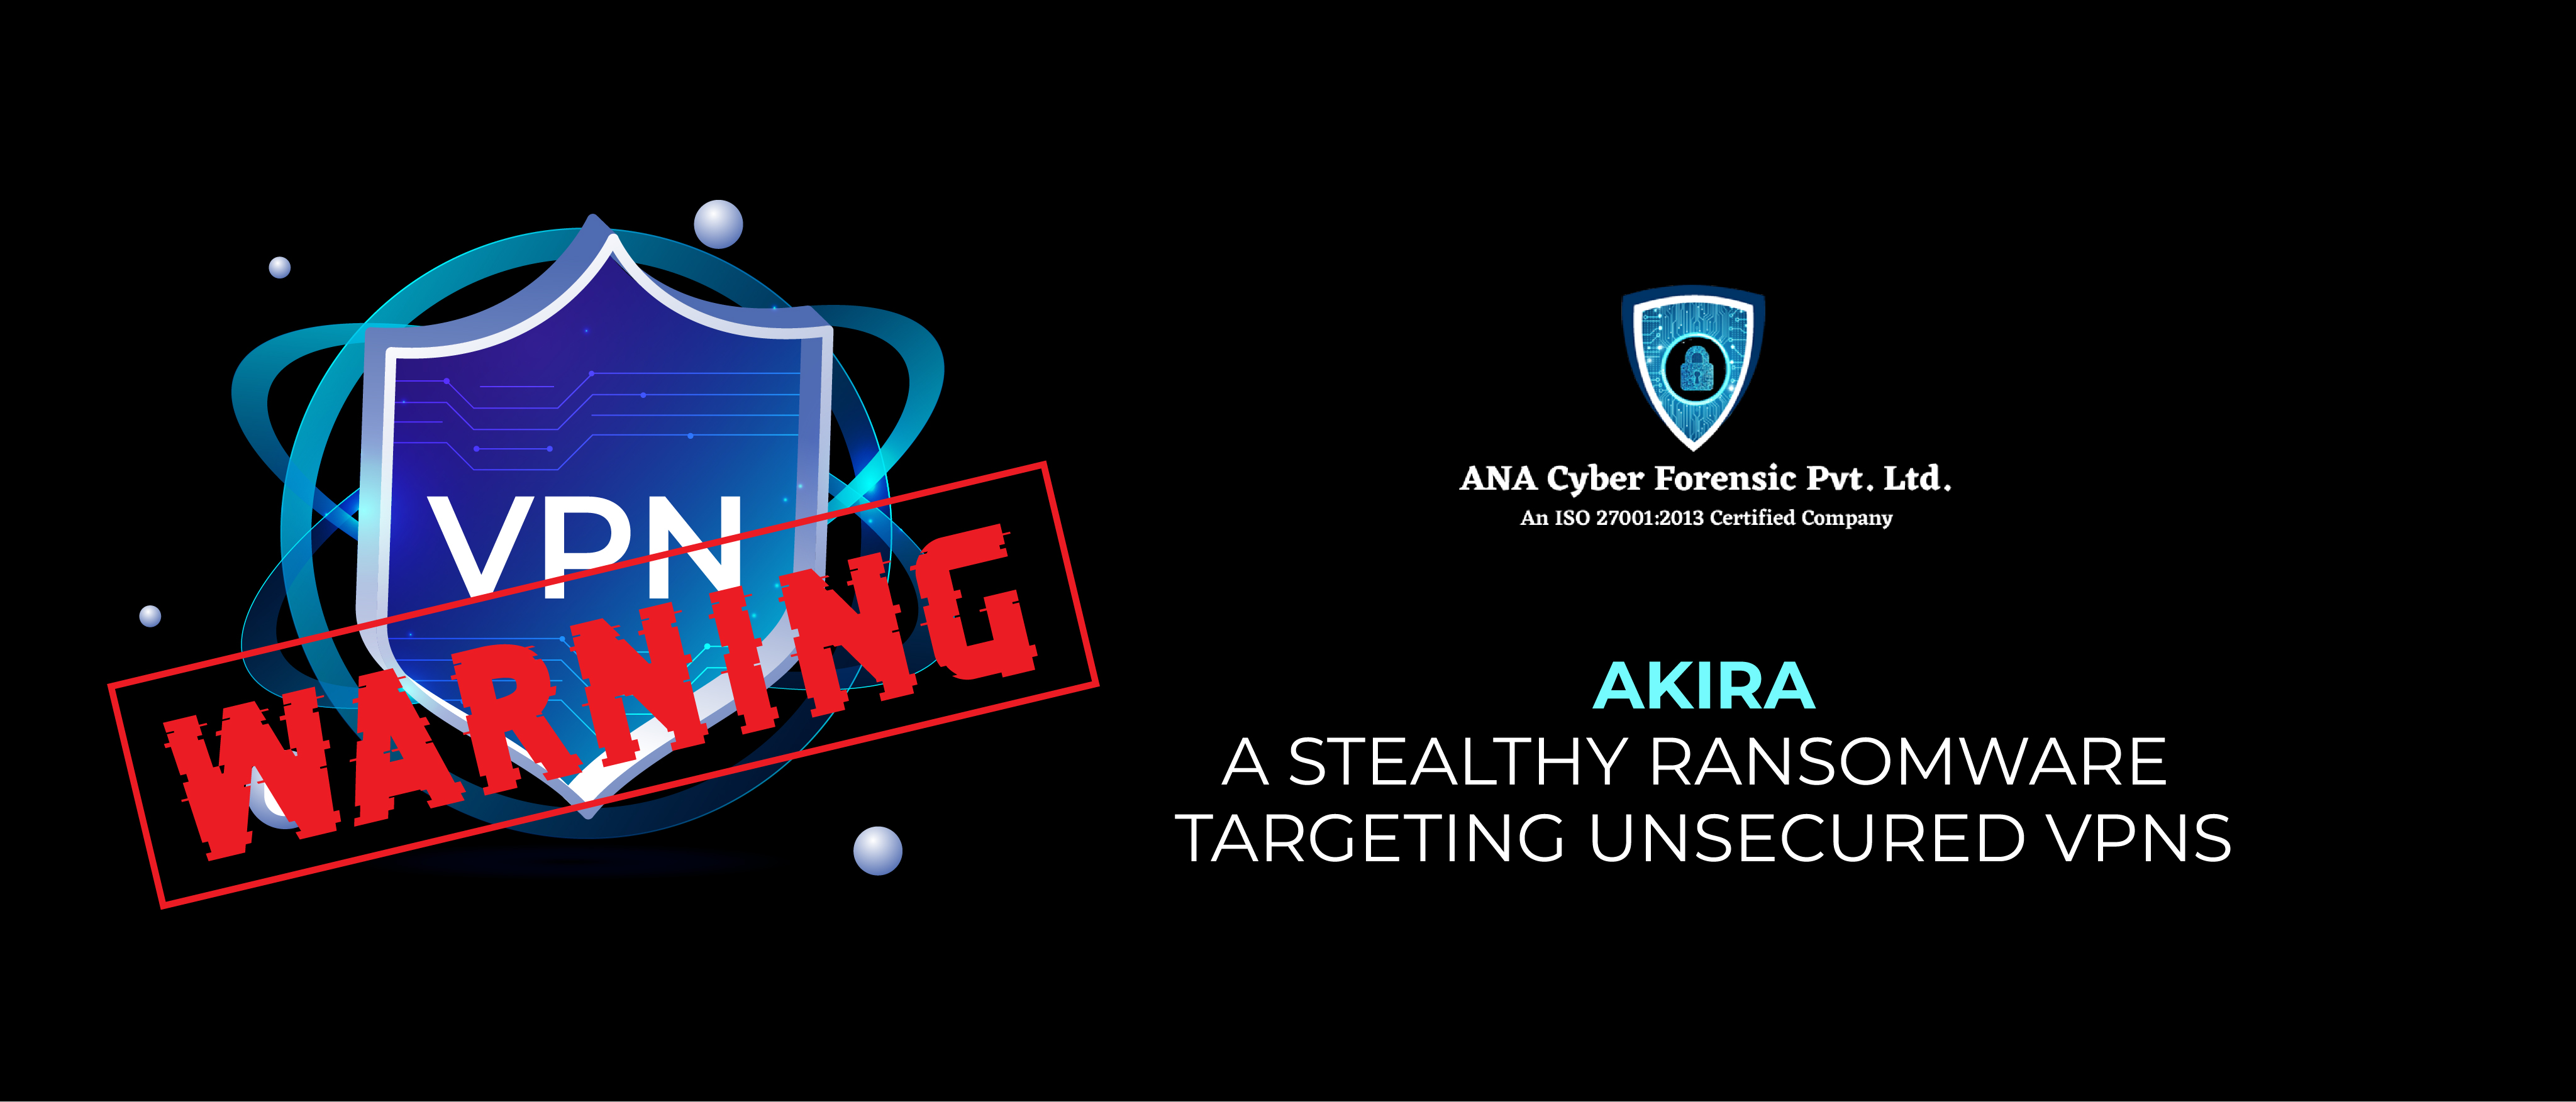 Akira: A Stealthy Ransomware Targeting Unsecured VPNs